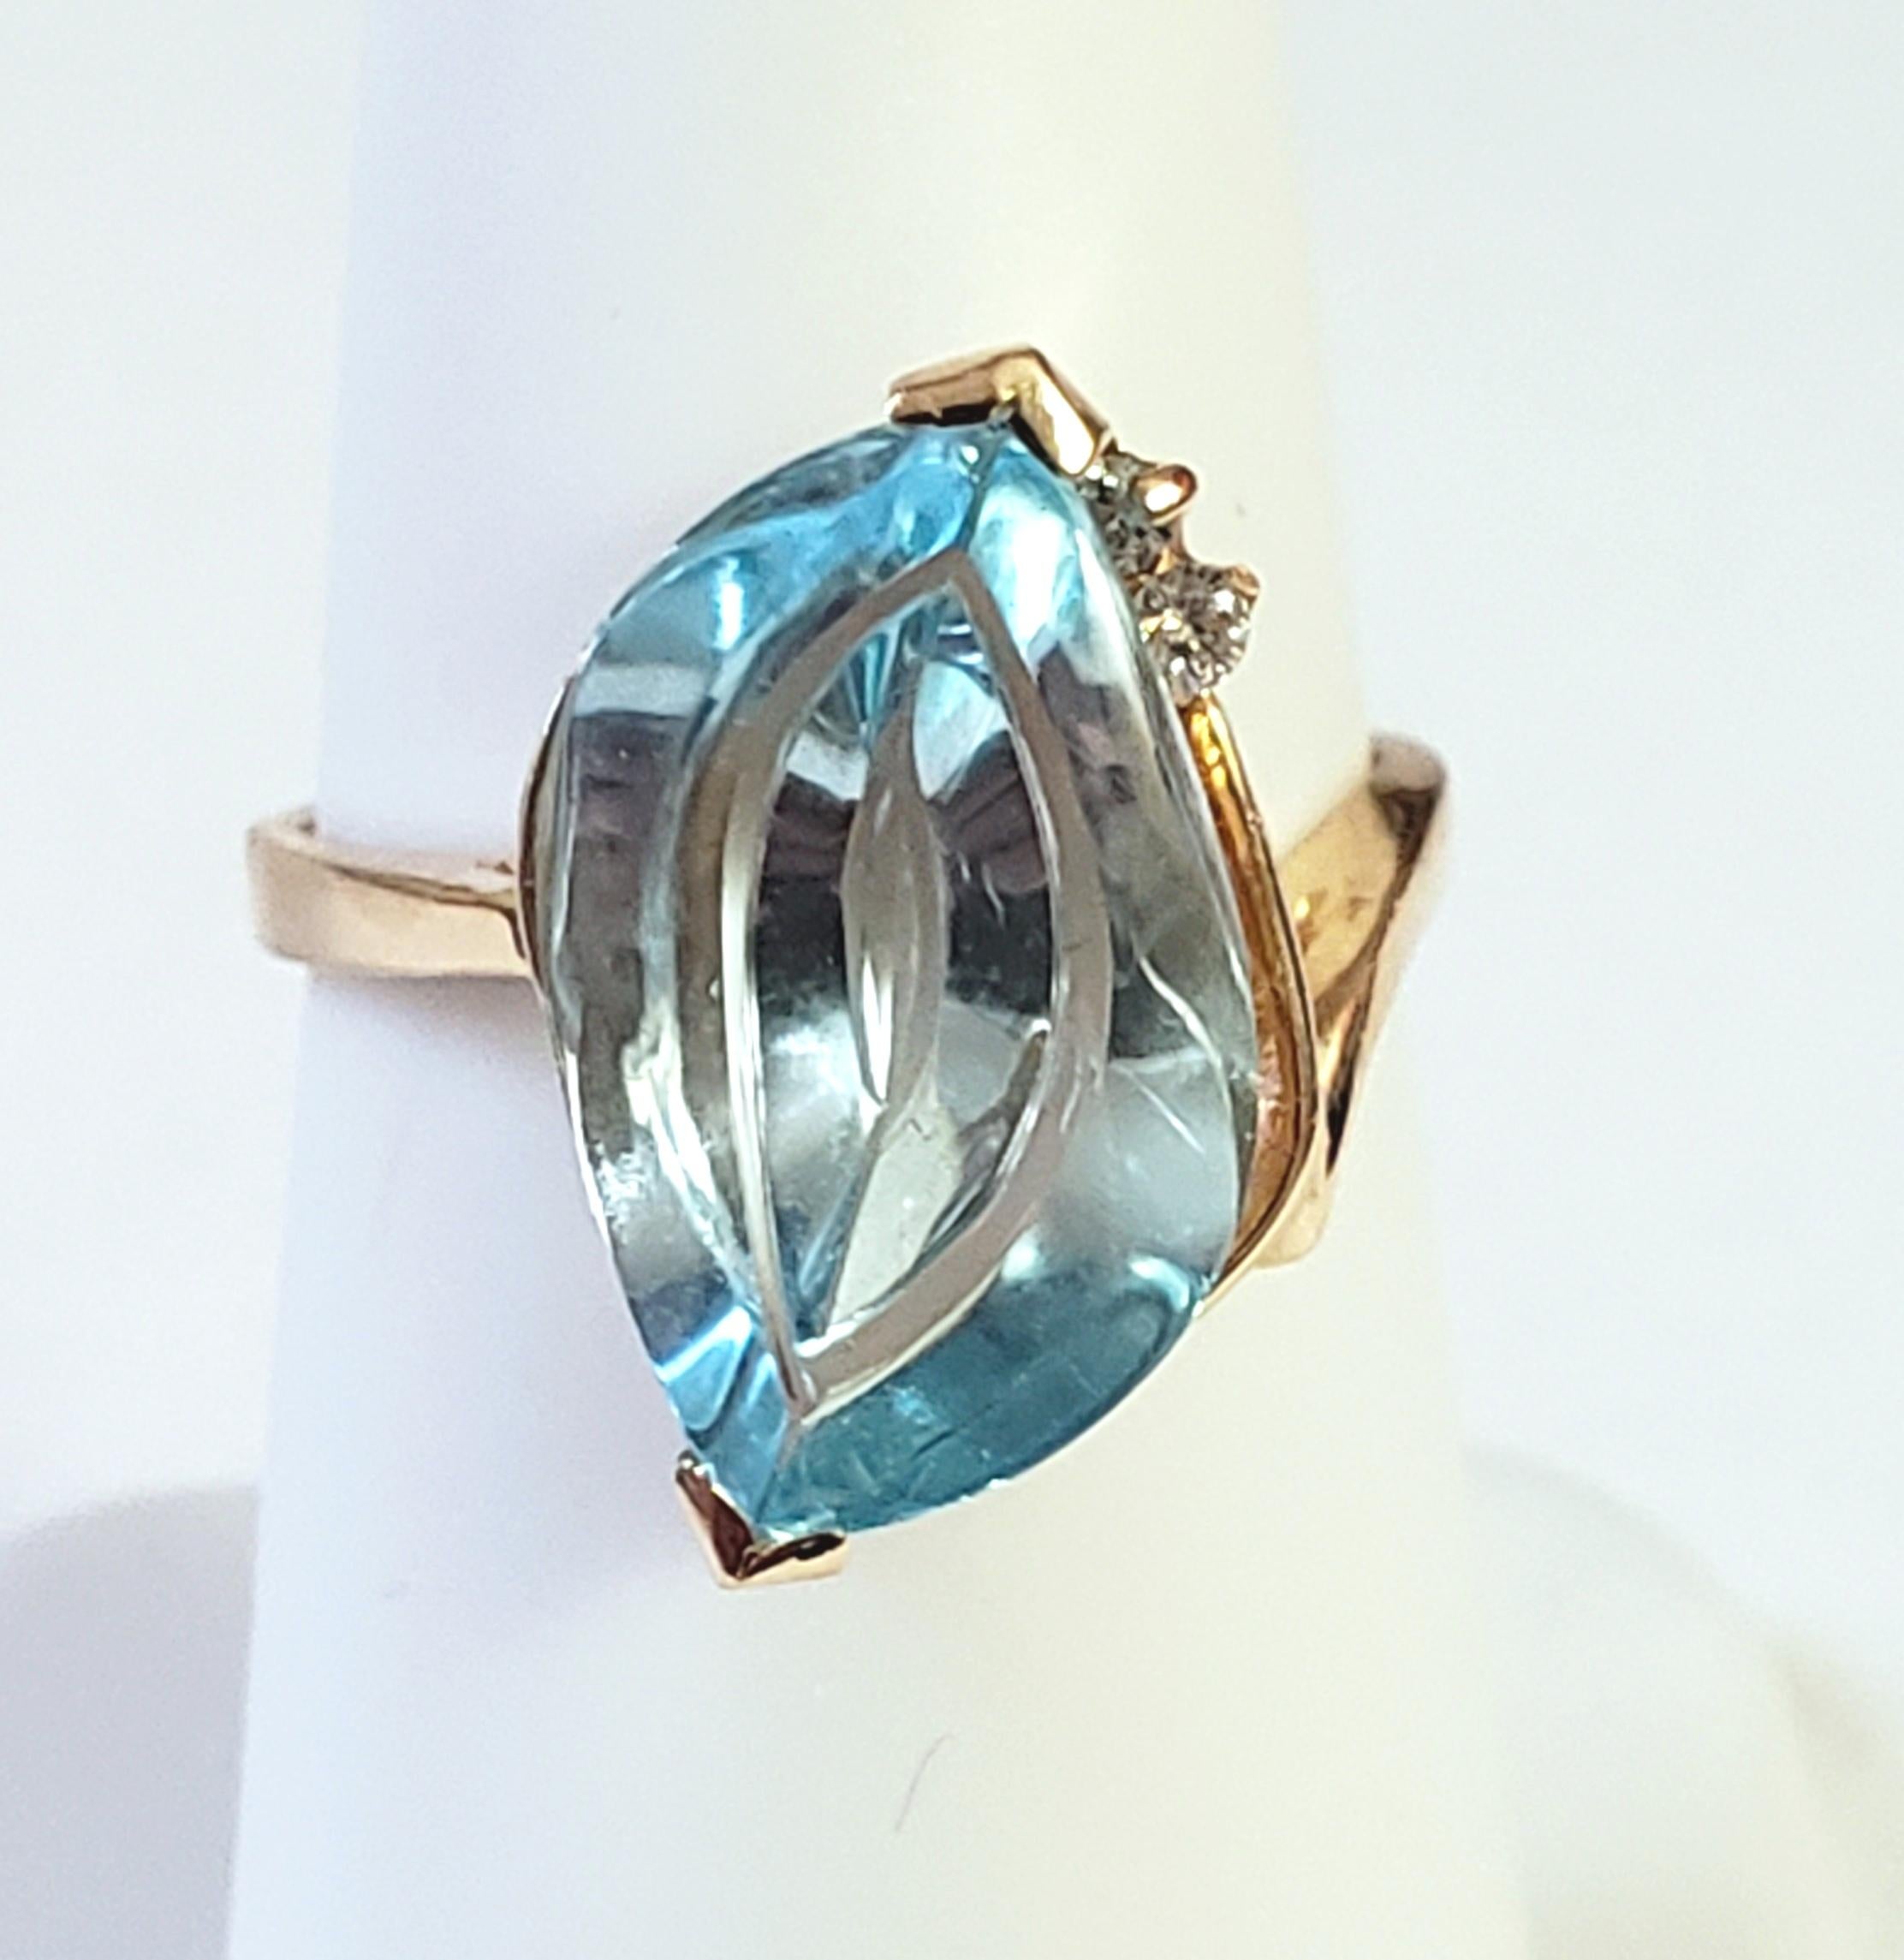 New Fantasy SPECIAL Cut  5 Carat, Natural Sky Blue Topaz Ring in 14K Yellow Gold